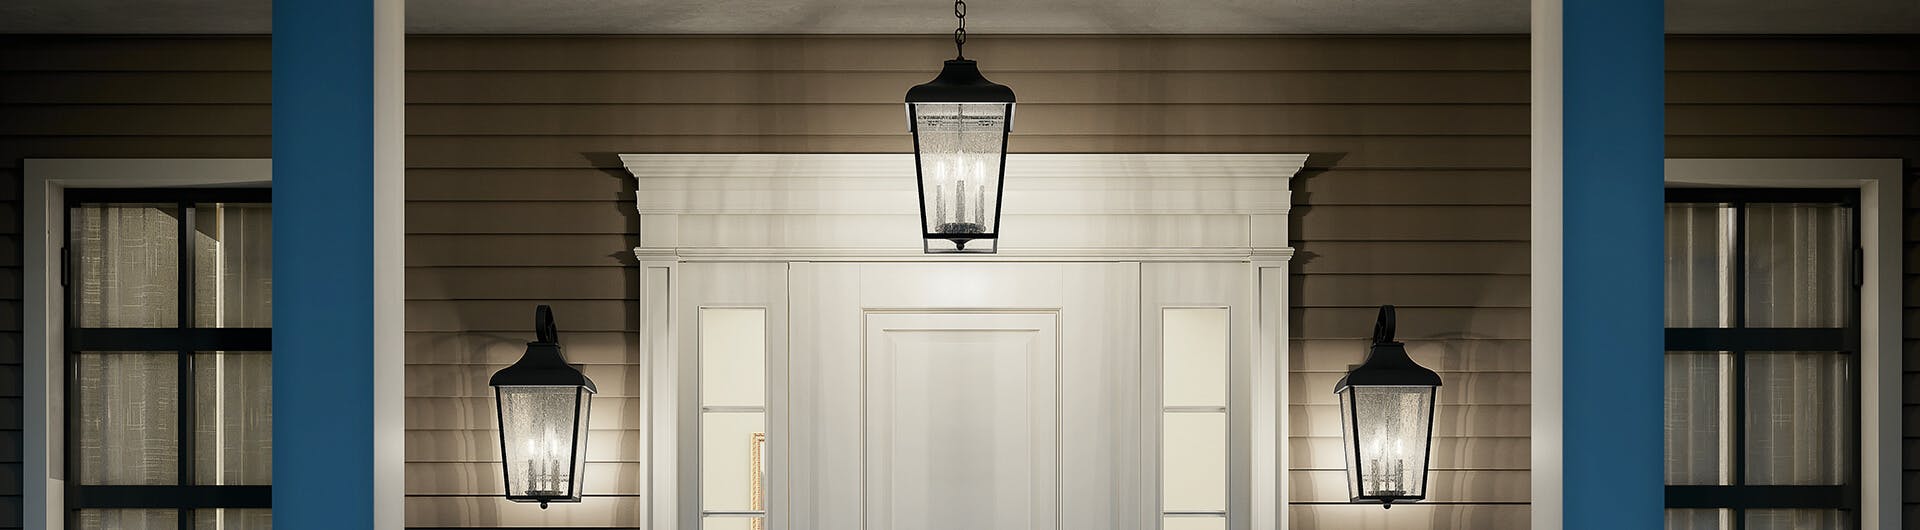 Entryway with three 4-light Forestdale hanging pendants in black illuminating the door